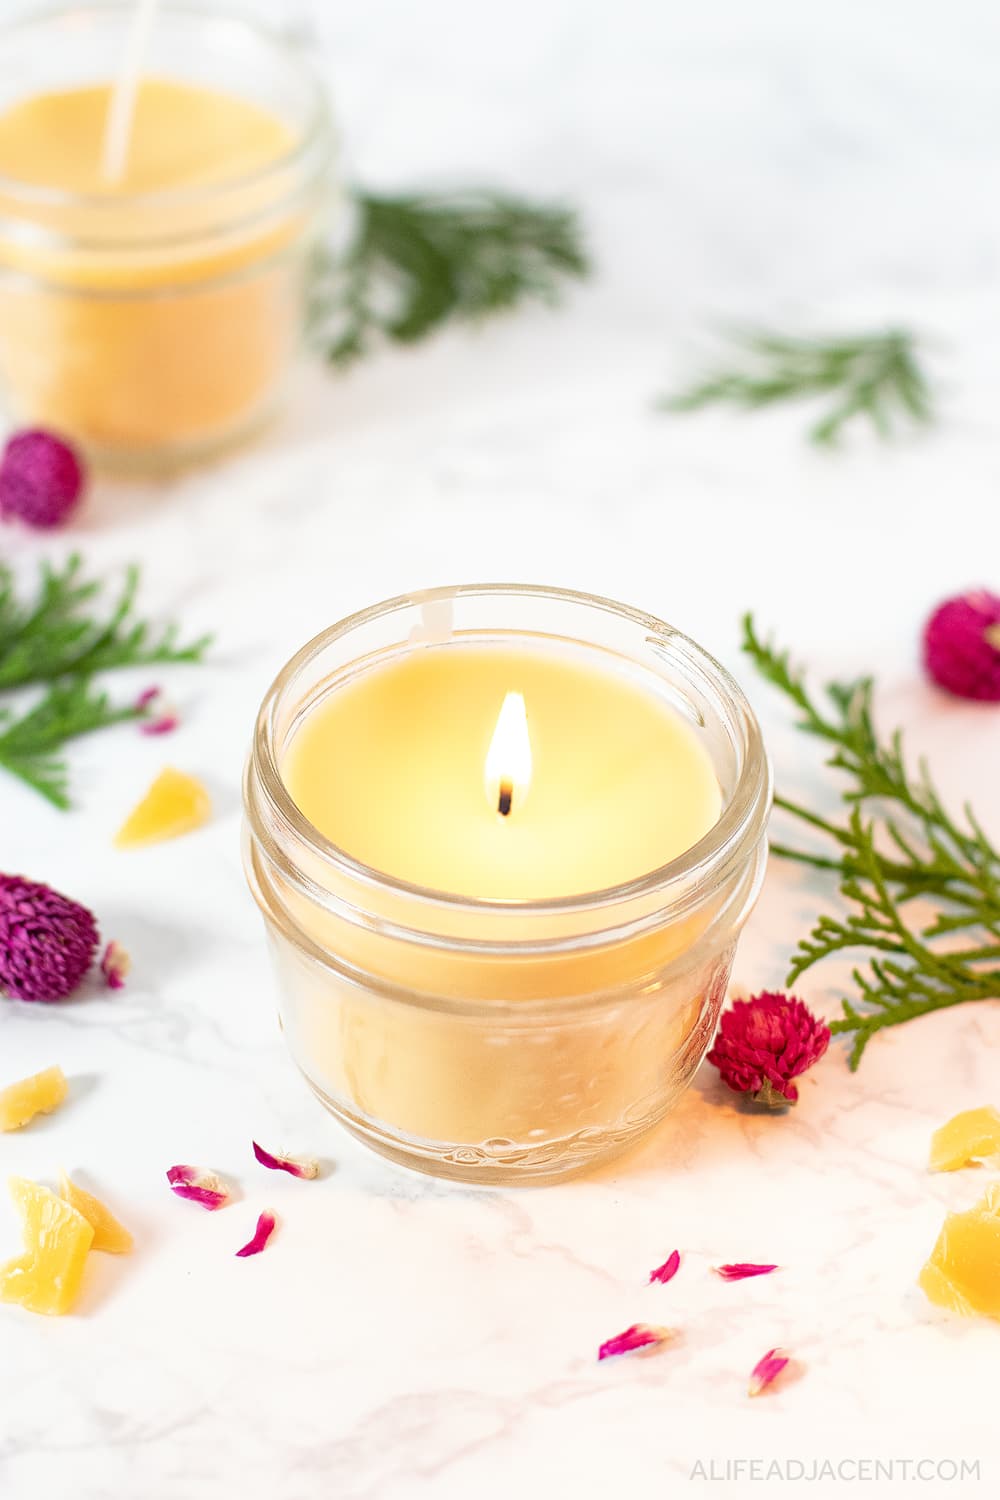 Benefits of Soy Wax Candles  Soy candle benefits, Candle scents recipes,  Candles